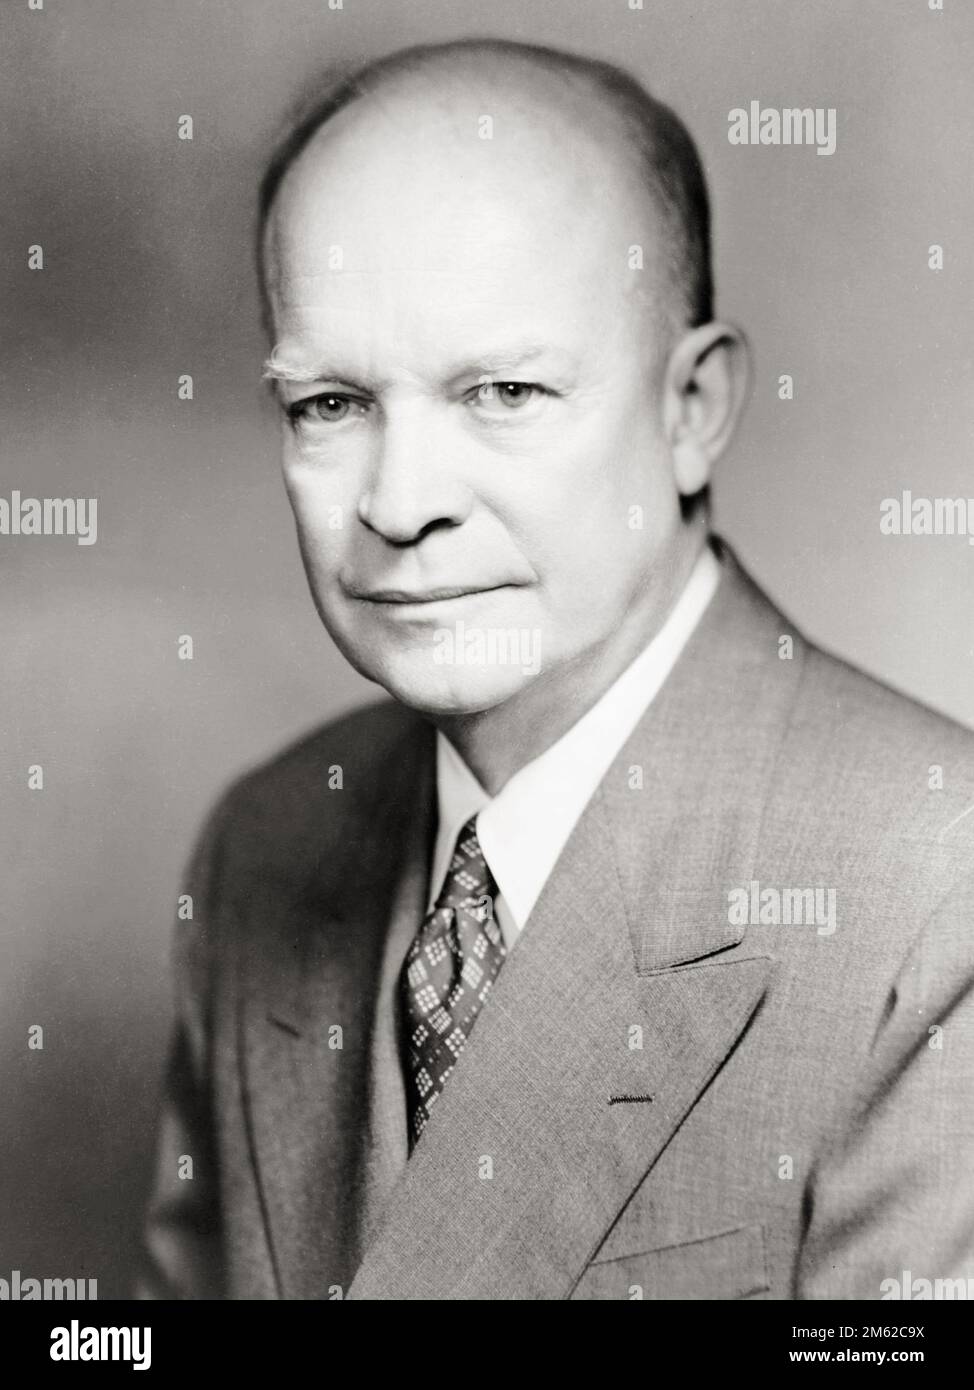 General of the Army - Dwight D. Eisenhower, President-elect of the United States. 1952. Photo by Bachrach Stock Photo